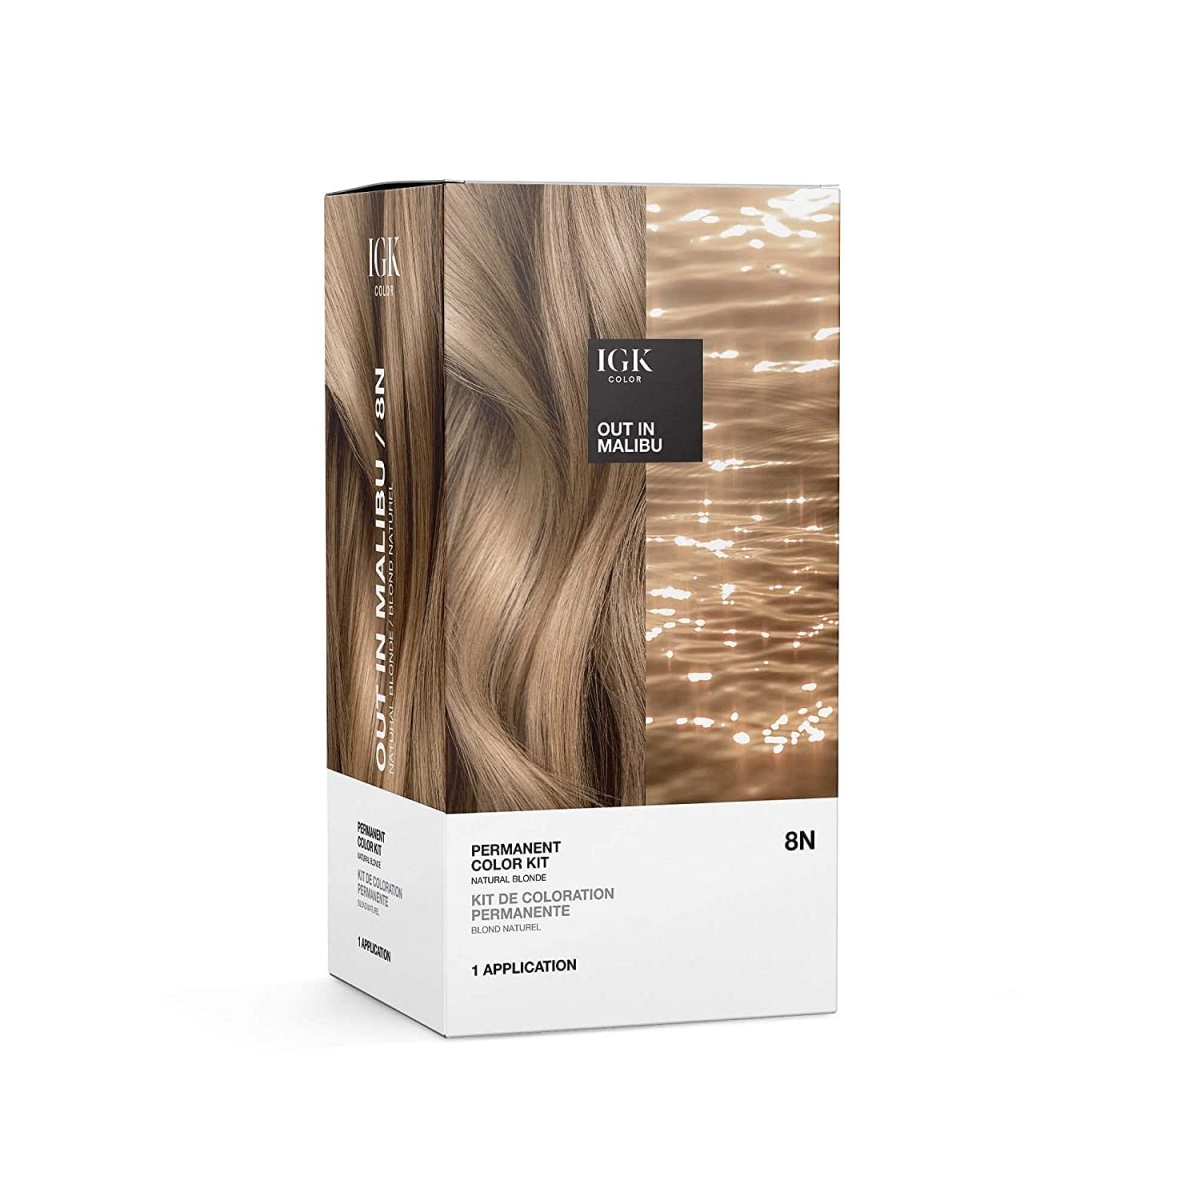 Picture of IGK 459840 Permanent Color Kit - 8N Out In Malibu for Unisex - Light Natural Blonde